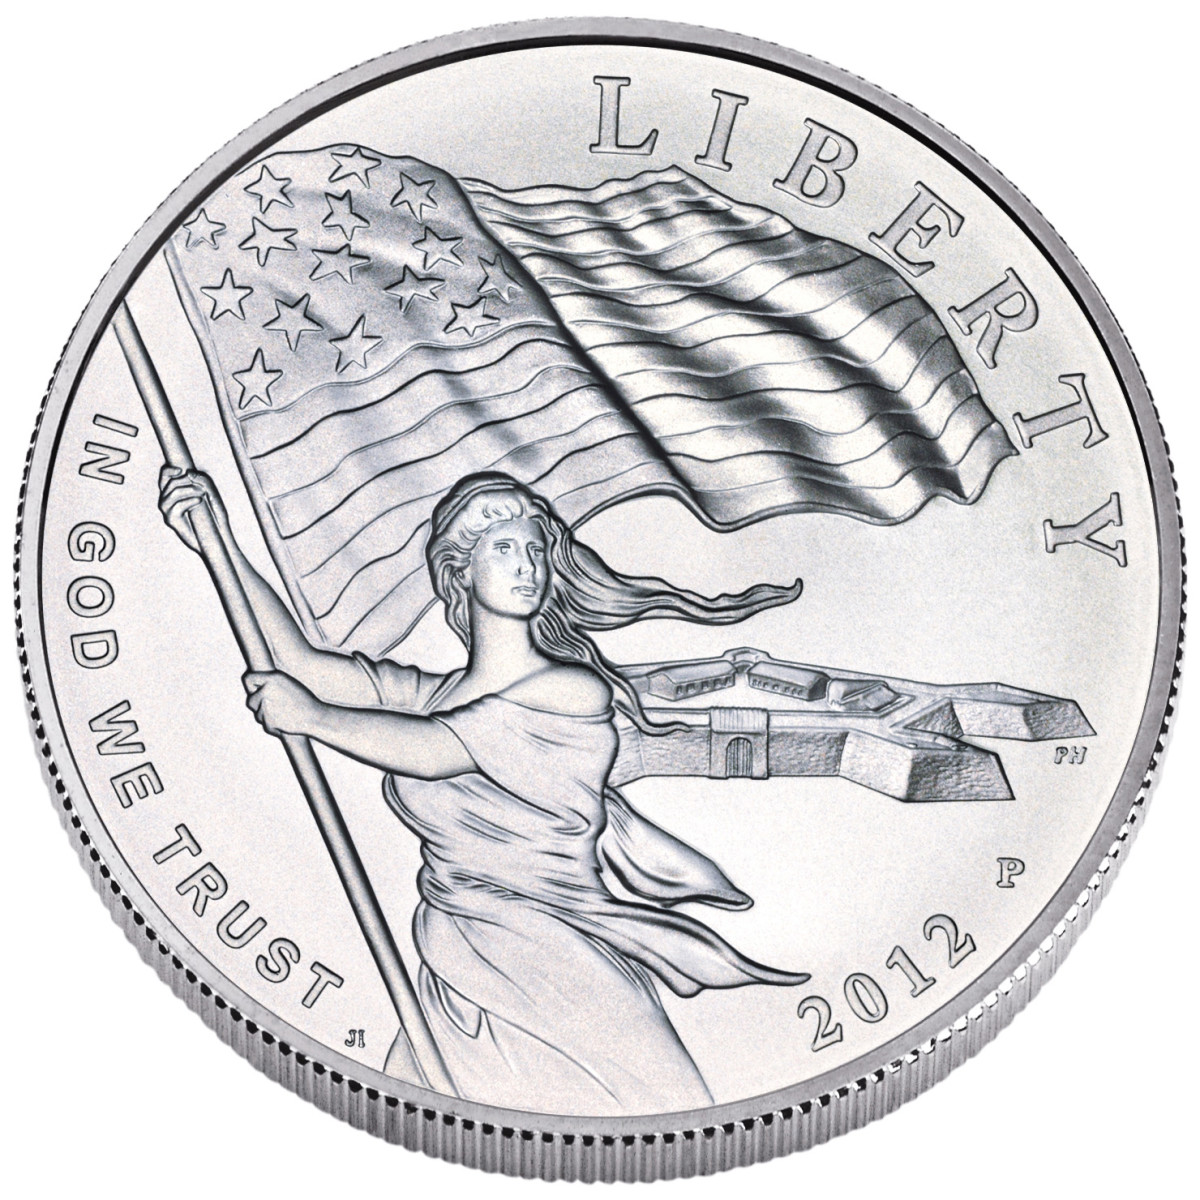 2012 Star-Spangled Banner uncirculated silver dollar commemorative. (Image courtesy United States Mint.)